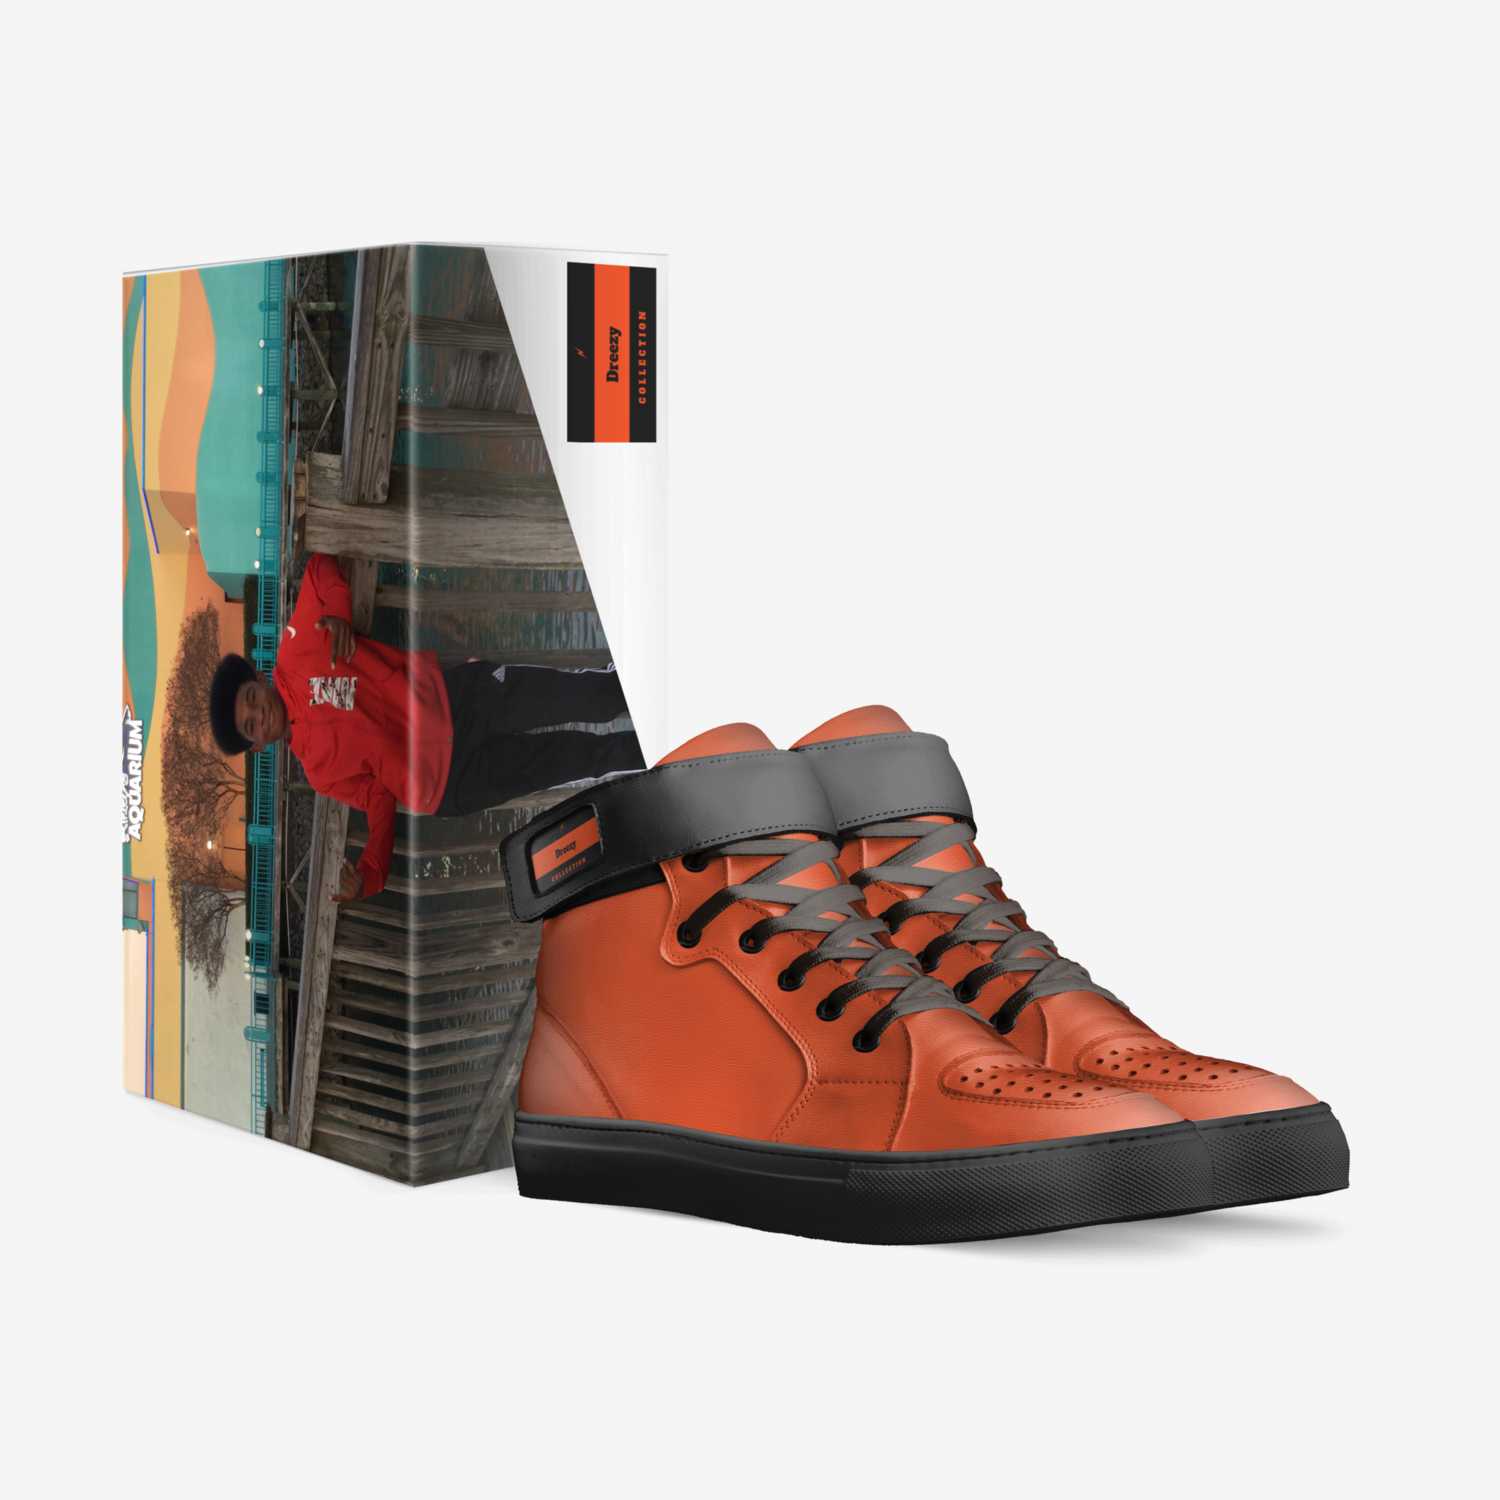 JUICE 1s custom made in Italy shoes by Demarion Parker | Box view